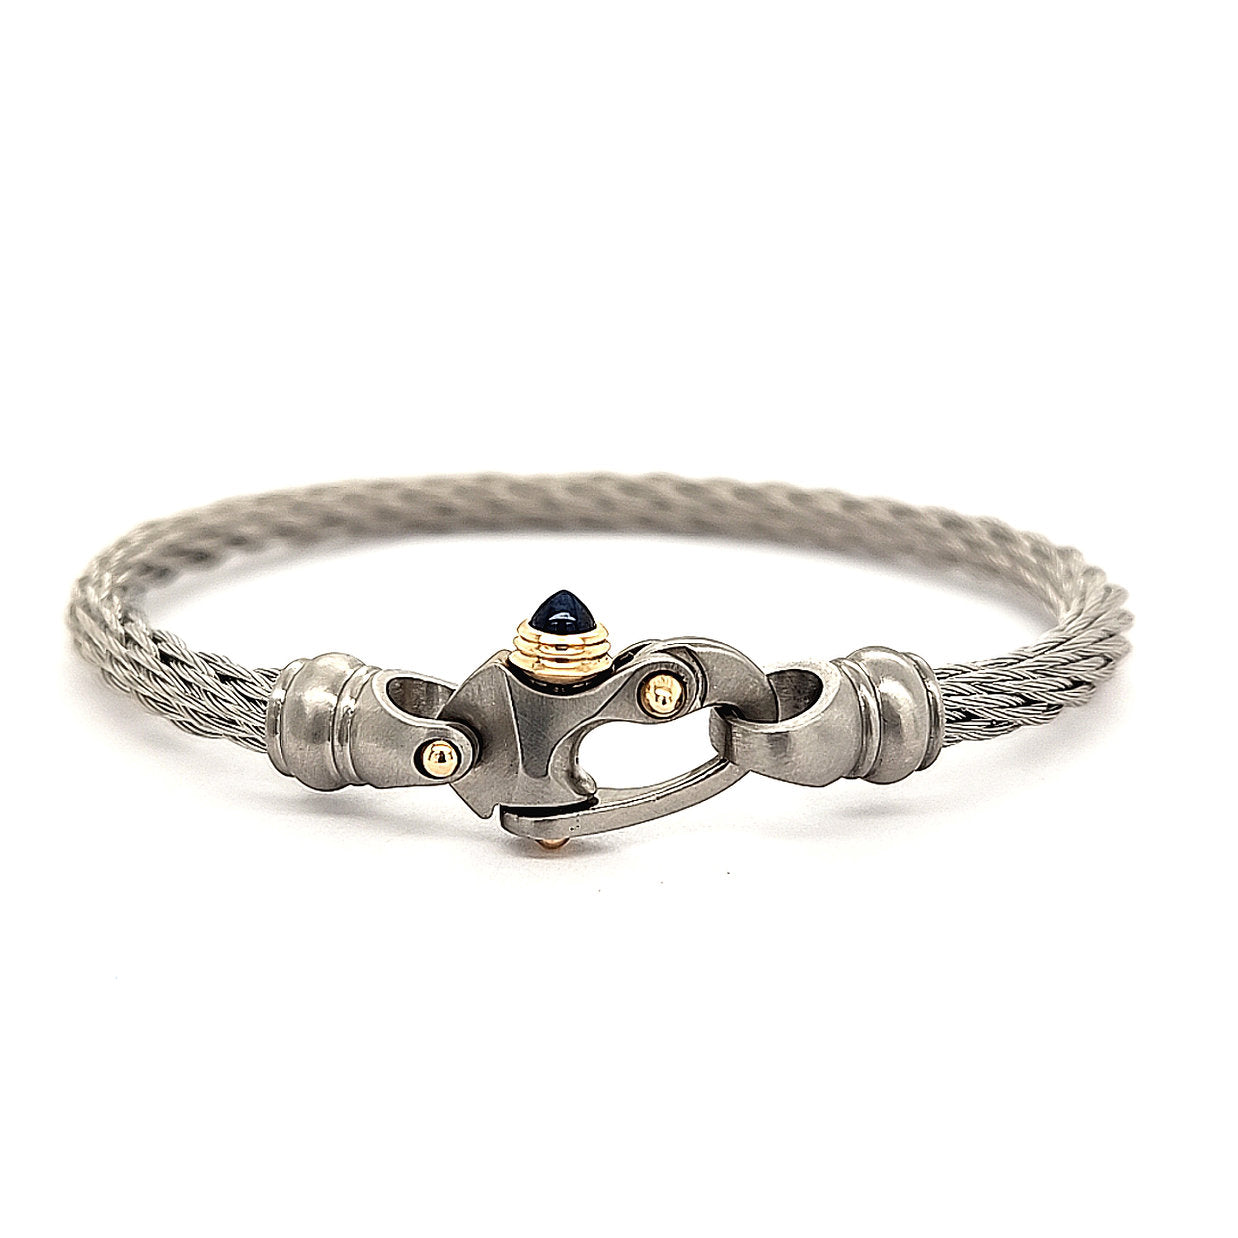 Nouveau Braid® 4.58mm Cable Bracelet with Mariner's Clasp® and 14K Gold Accents